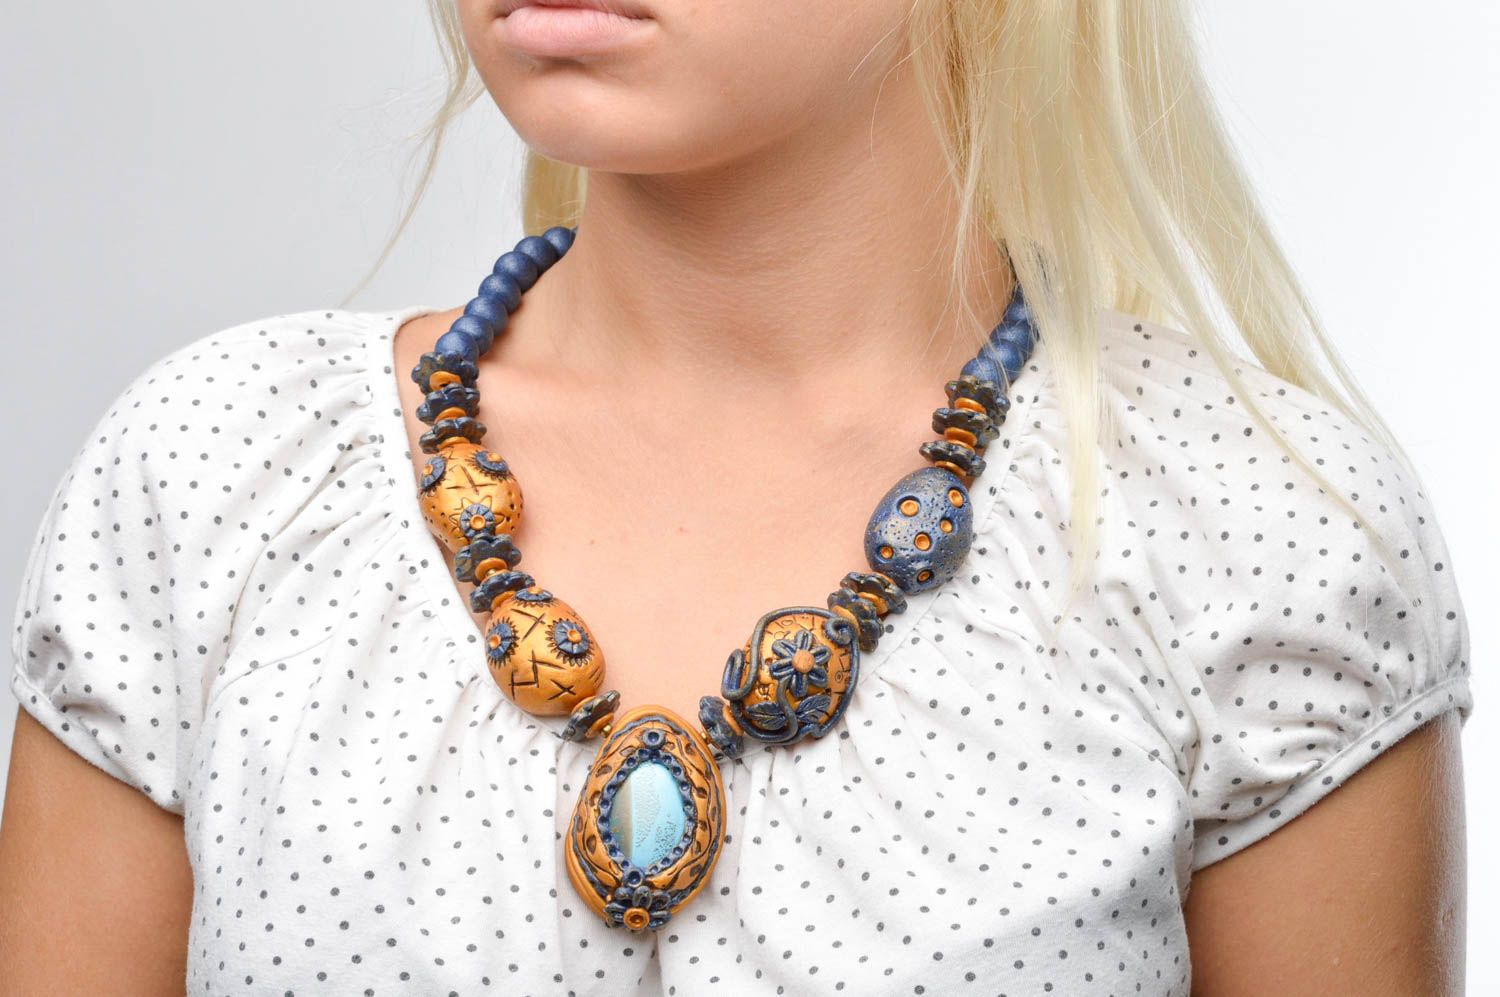 Beautiful handmade plastic necklace neck accessories cool jewelry designs photo 3